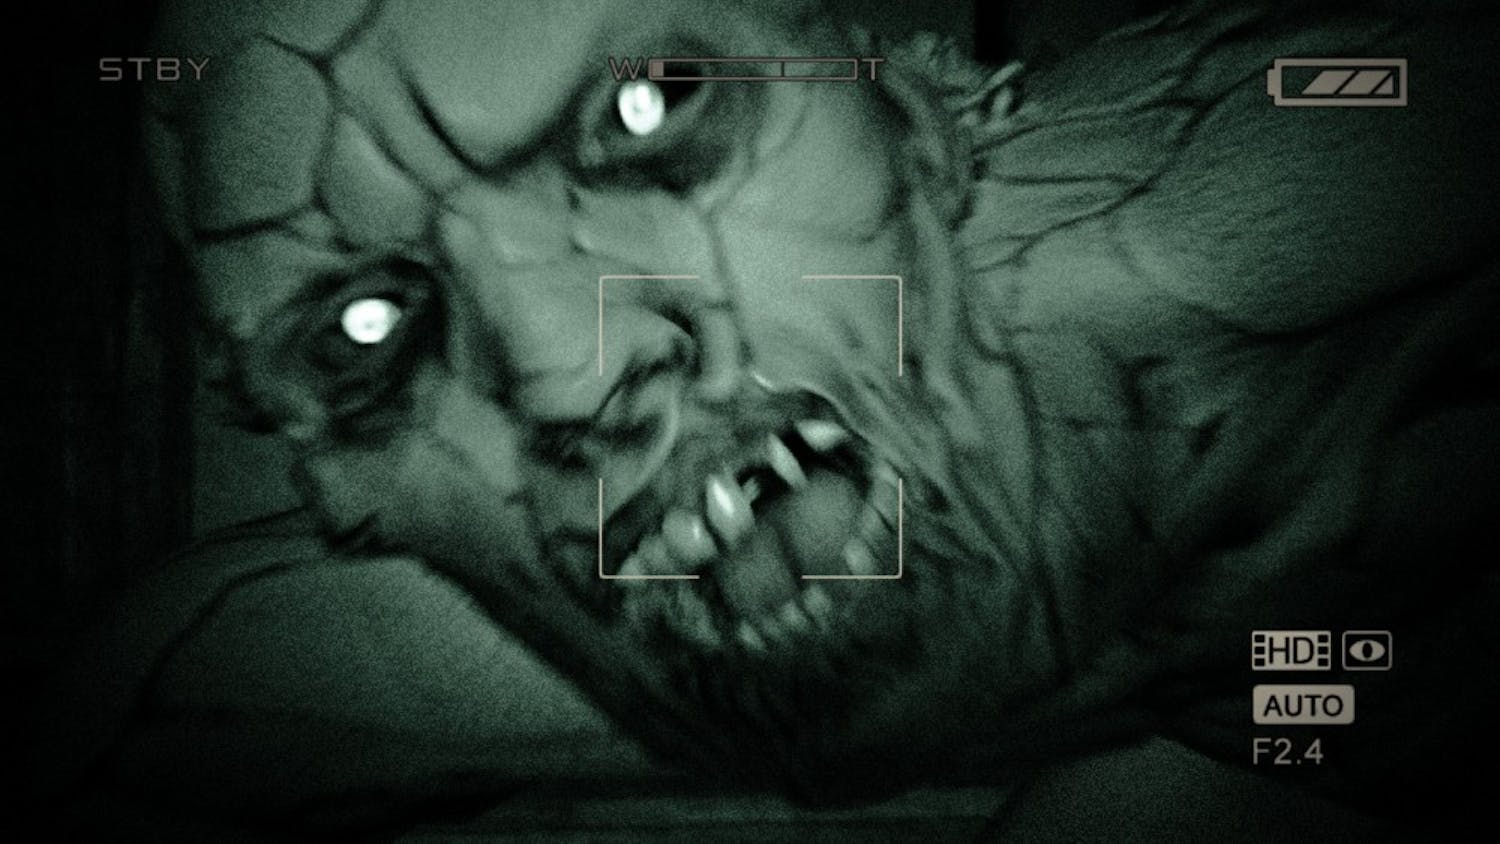 	&#8220;Outlast&#8221; uses the shaky camcorder technique with chilling effect, drawing inspiration from films like &#8220;The Blair Witch Project.&#8221;